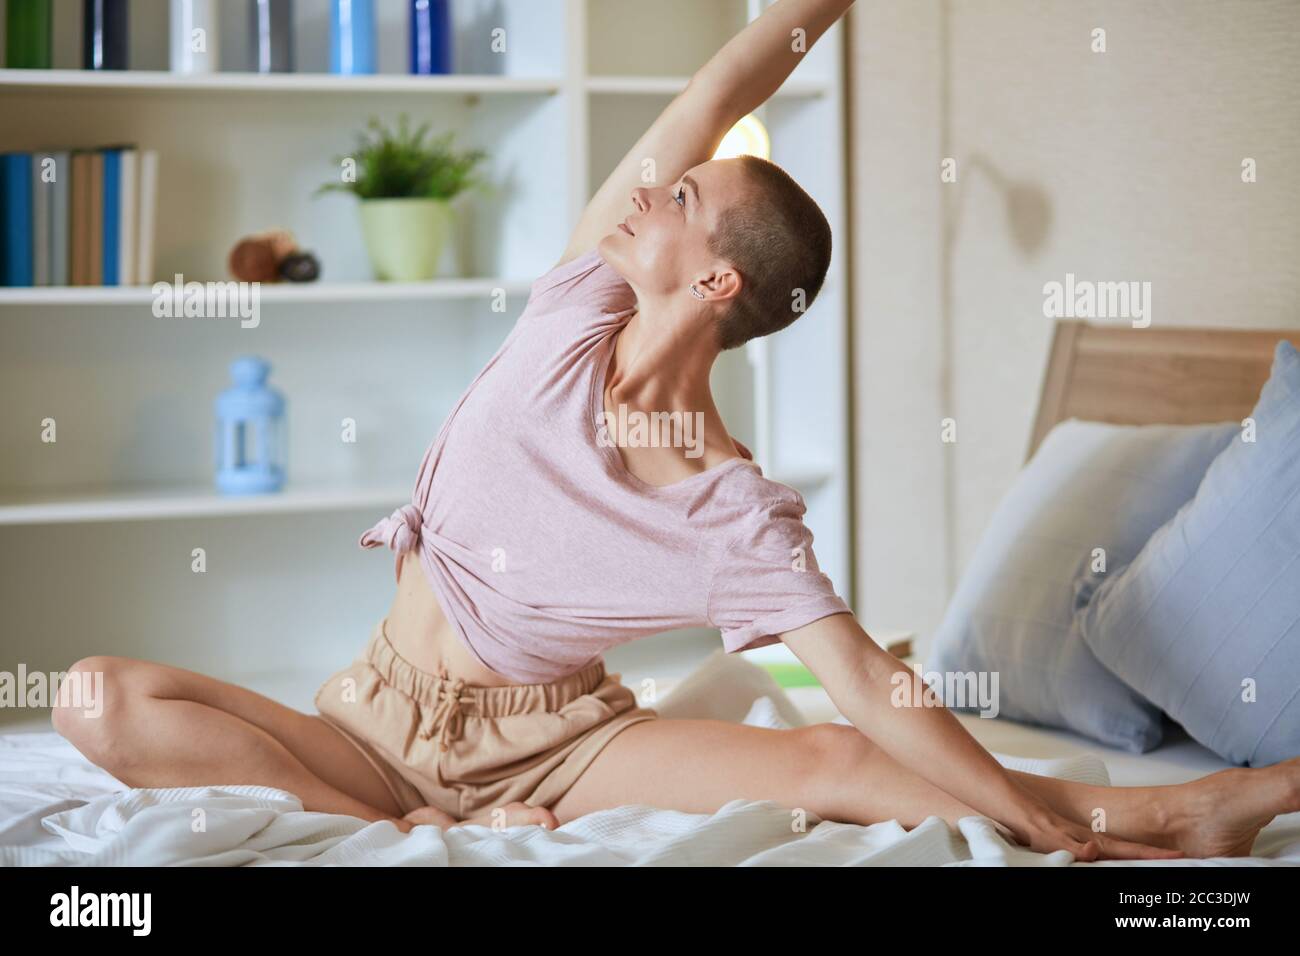 Caucasian woman on bed practice yoga exercises, background white room. Hands raised up. Stock Photo